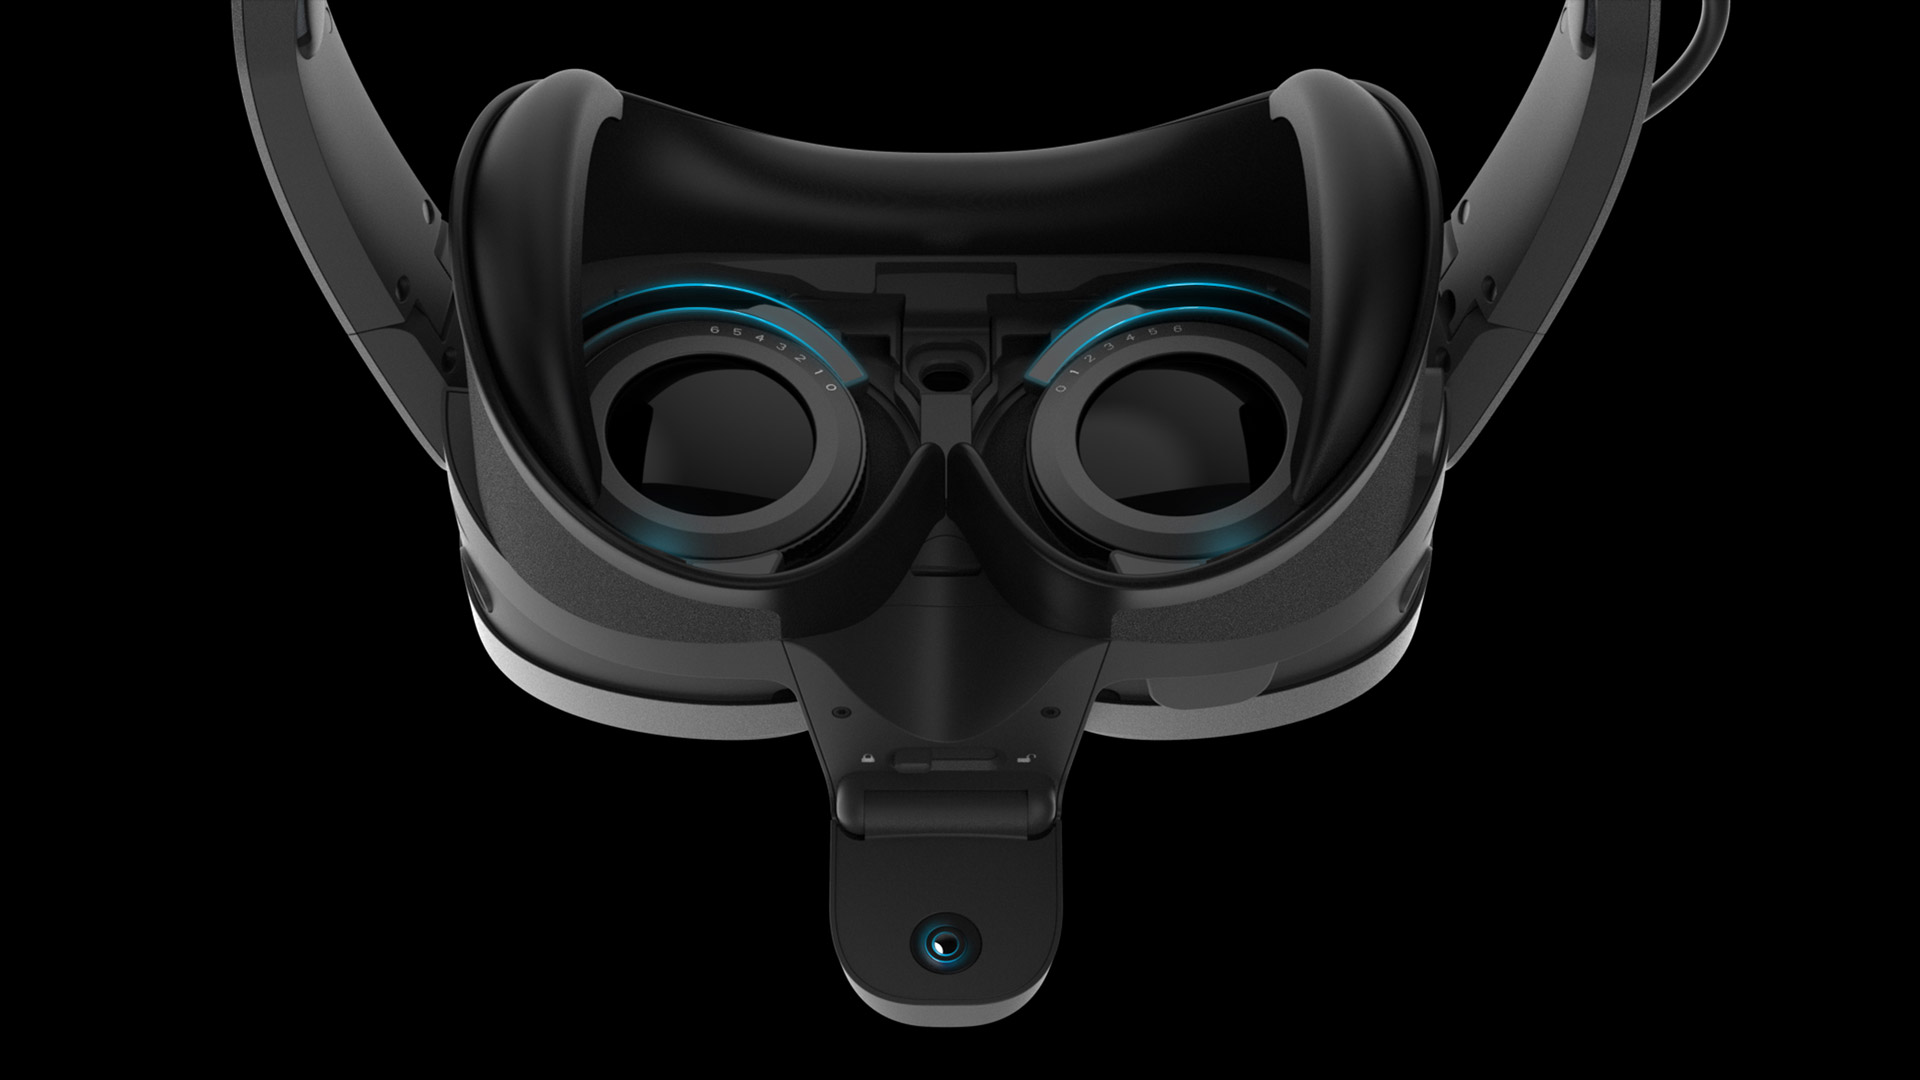 Vive XR Elite Gets Face-tracking Add-on with Eye & Mouth Sensing